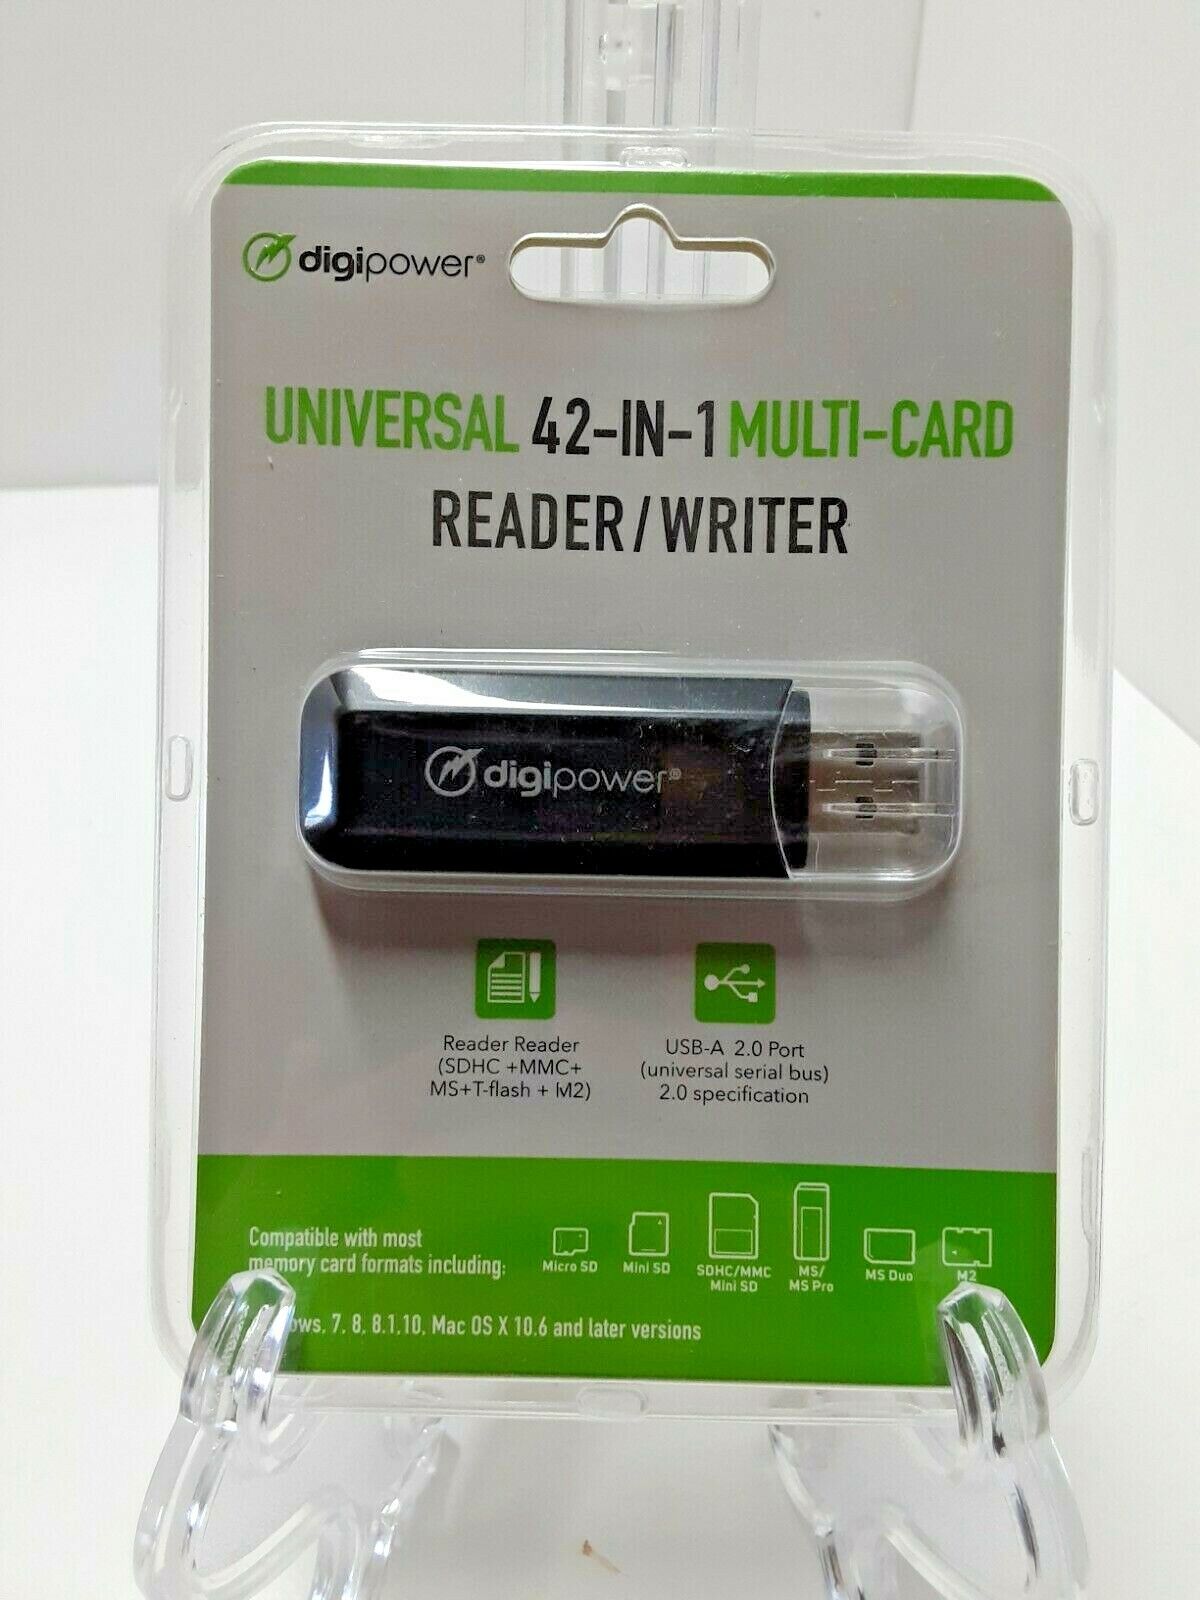 New Digipower Universal 42-in-1 Multi-Card Reader / Writer USB-A 2.0 Port